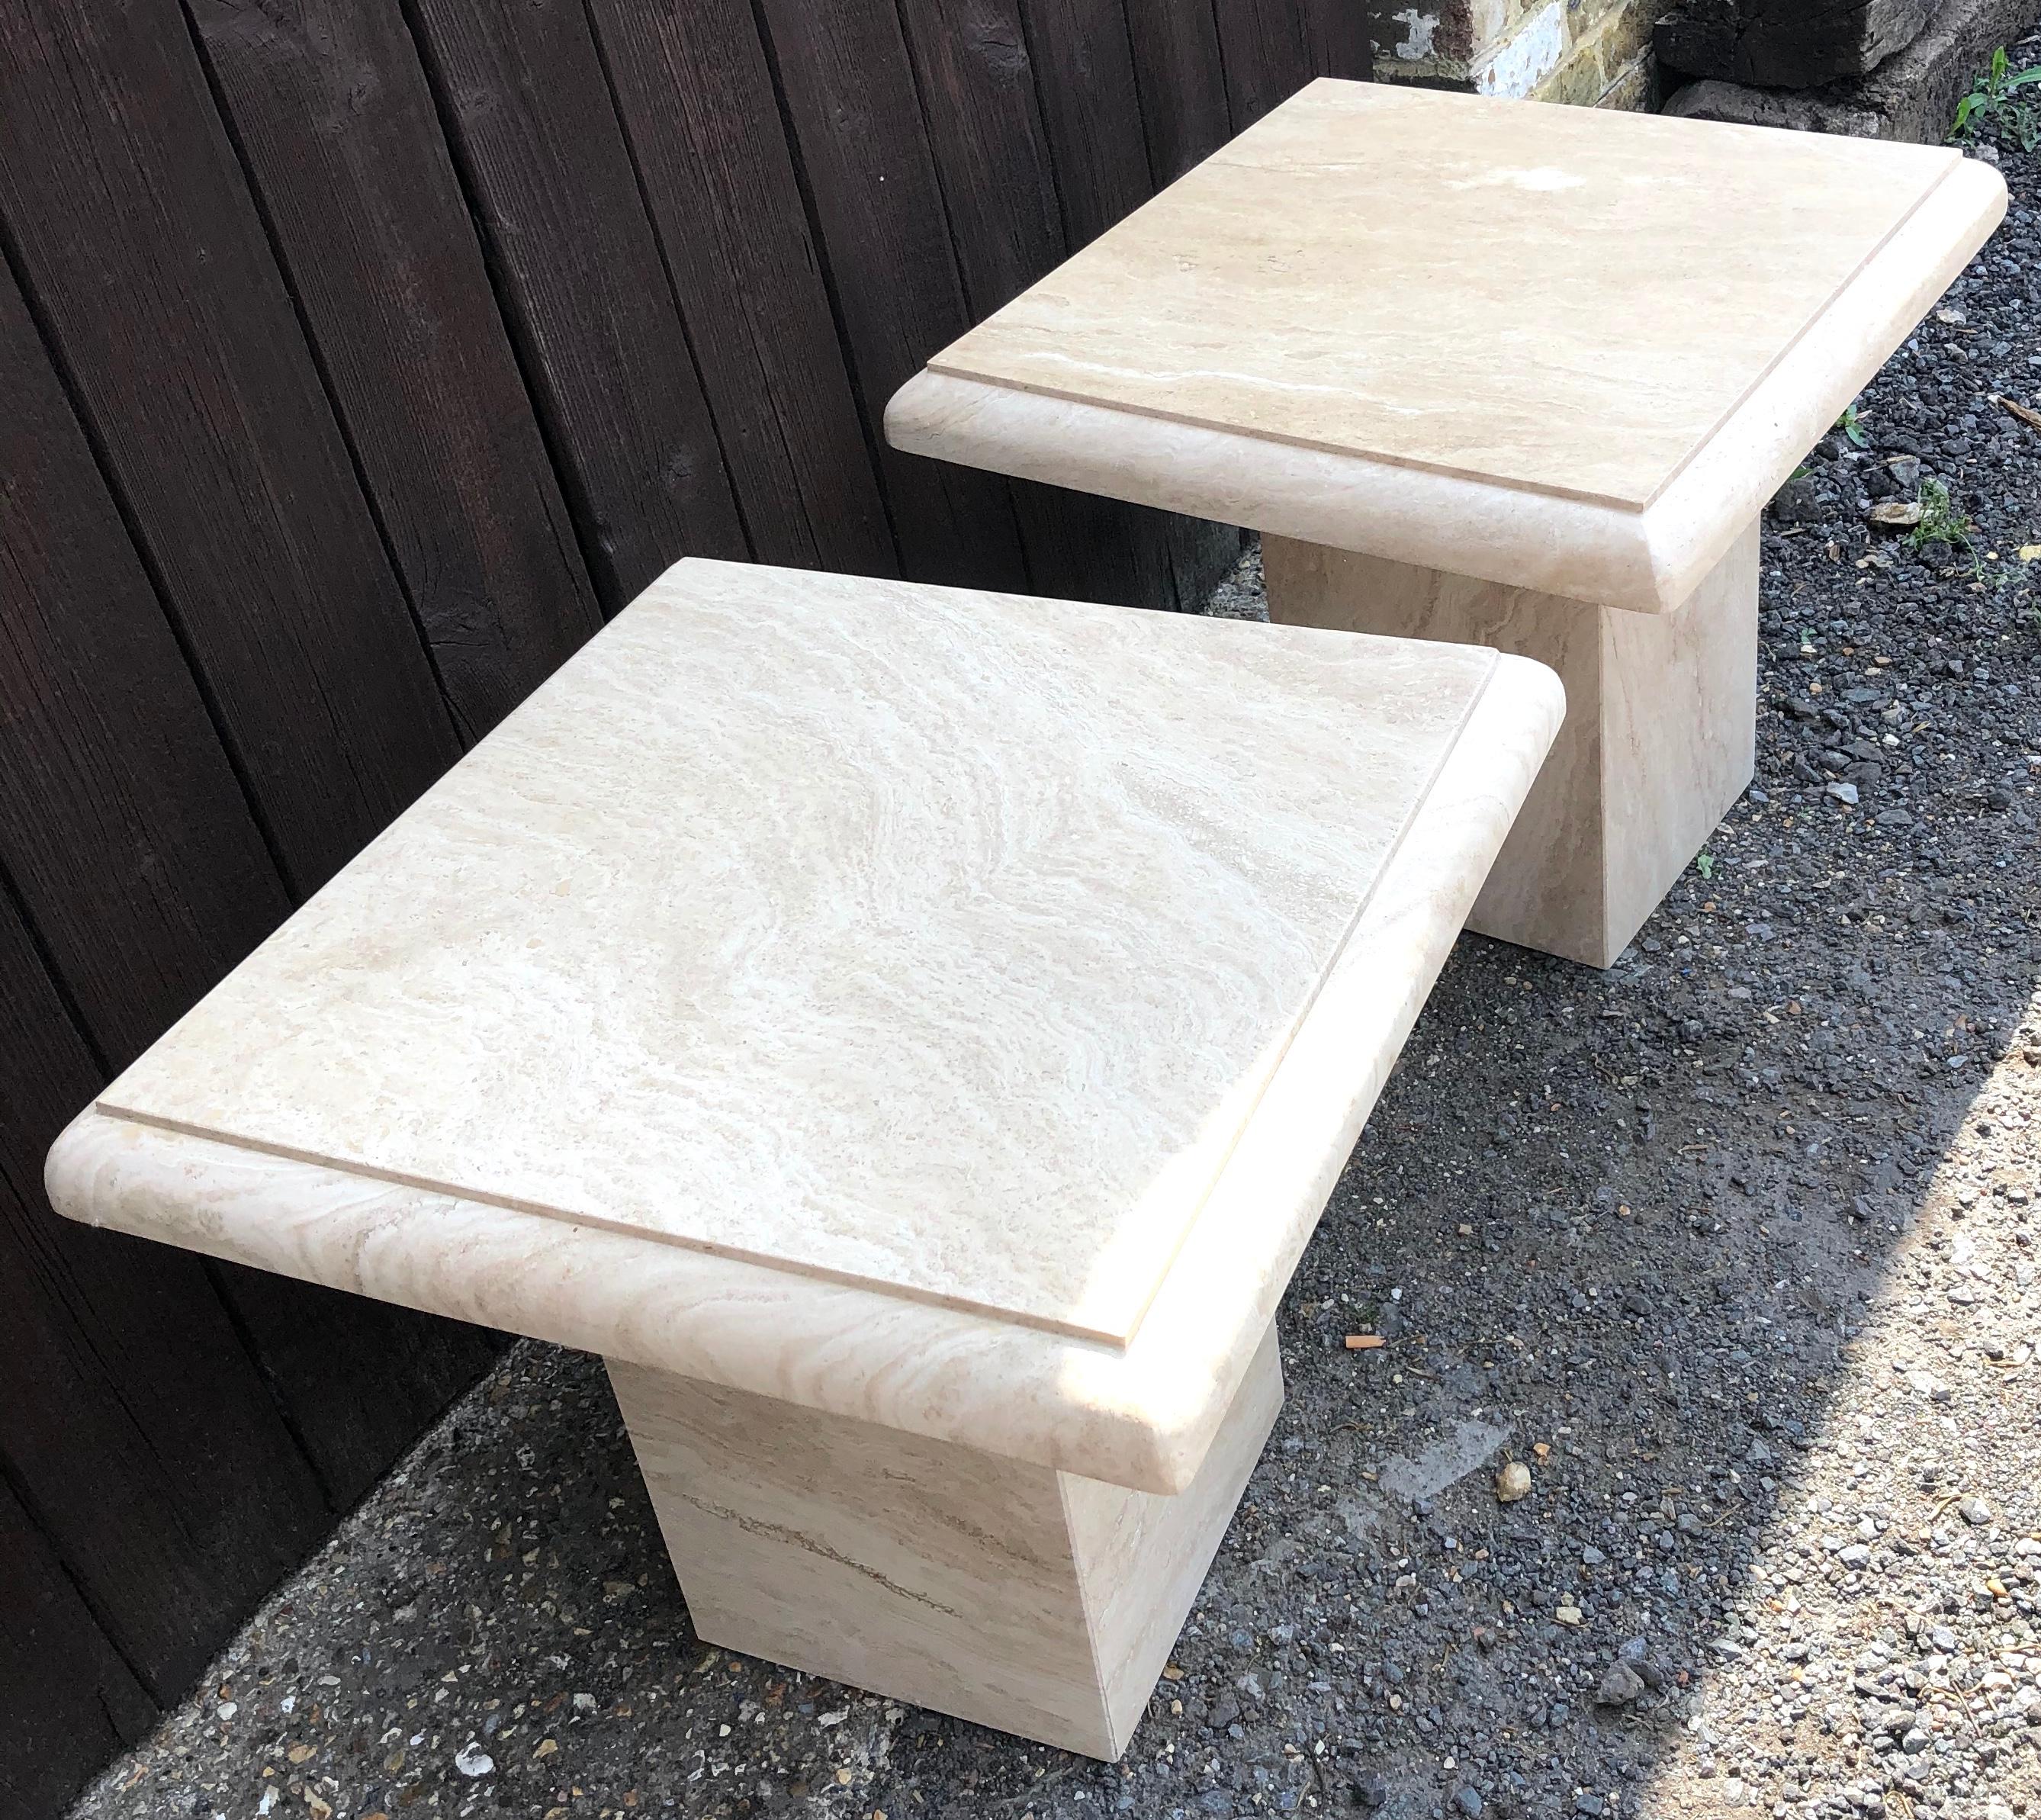 Pair of Mid Century Roche Bobois style Travertine side / end tables, 1970s

A beautiful Pair of Roche Bobois style travertine side / end tables, circa 1970s
Square tops with bevelled edge, sat central on square column base. 

The bases are separate